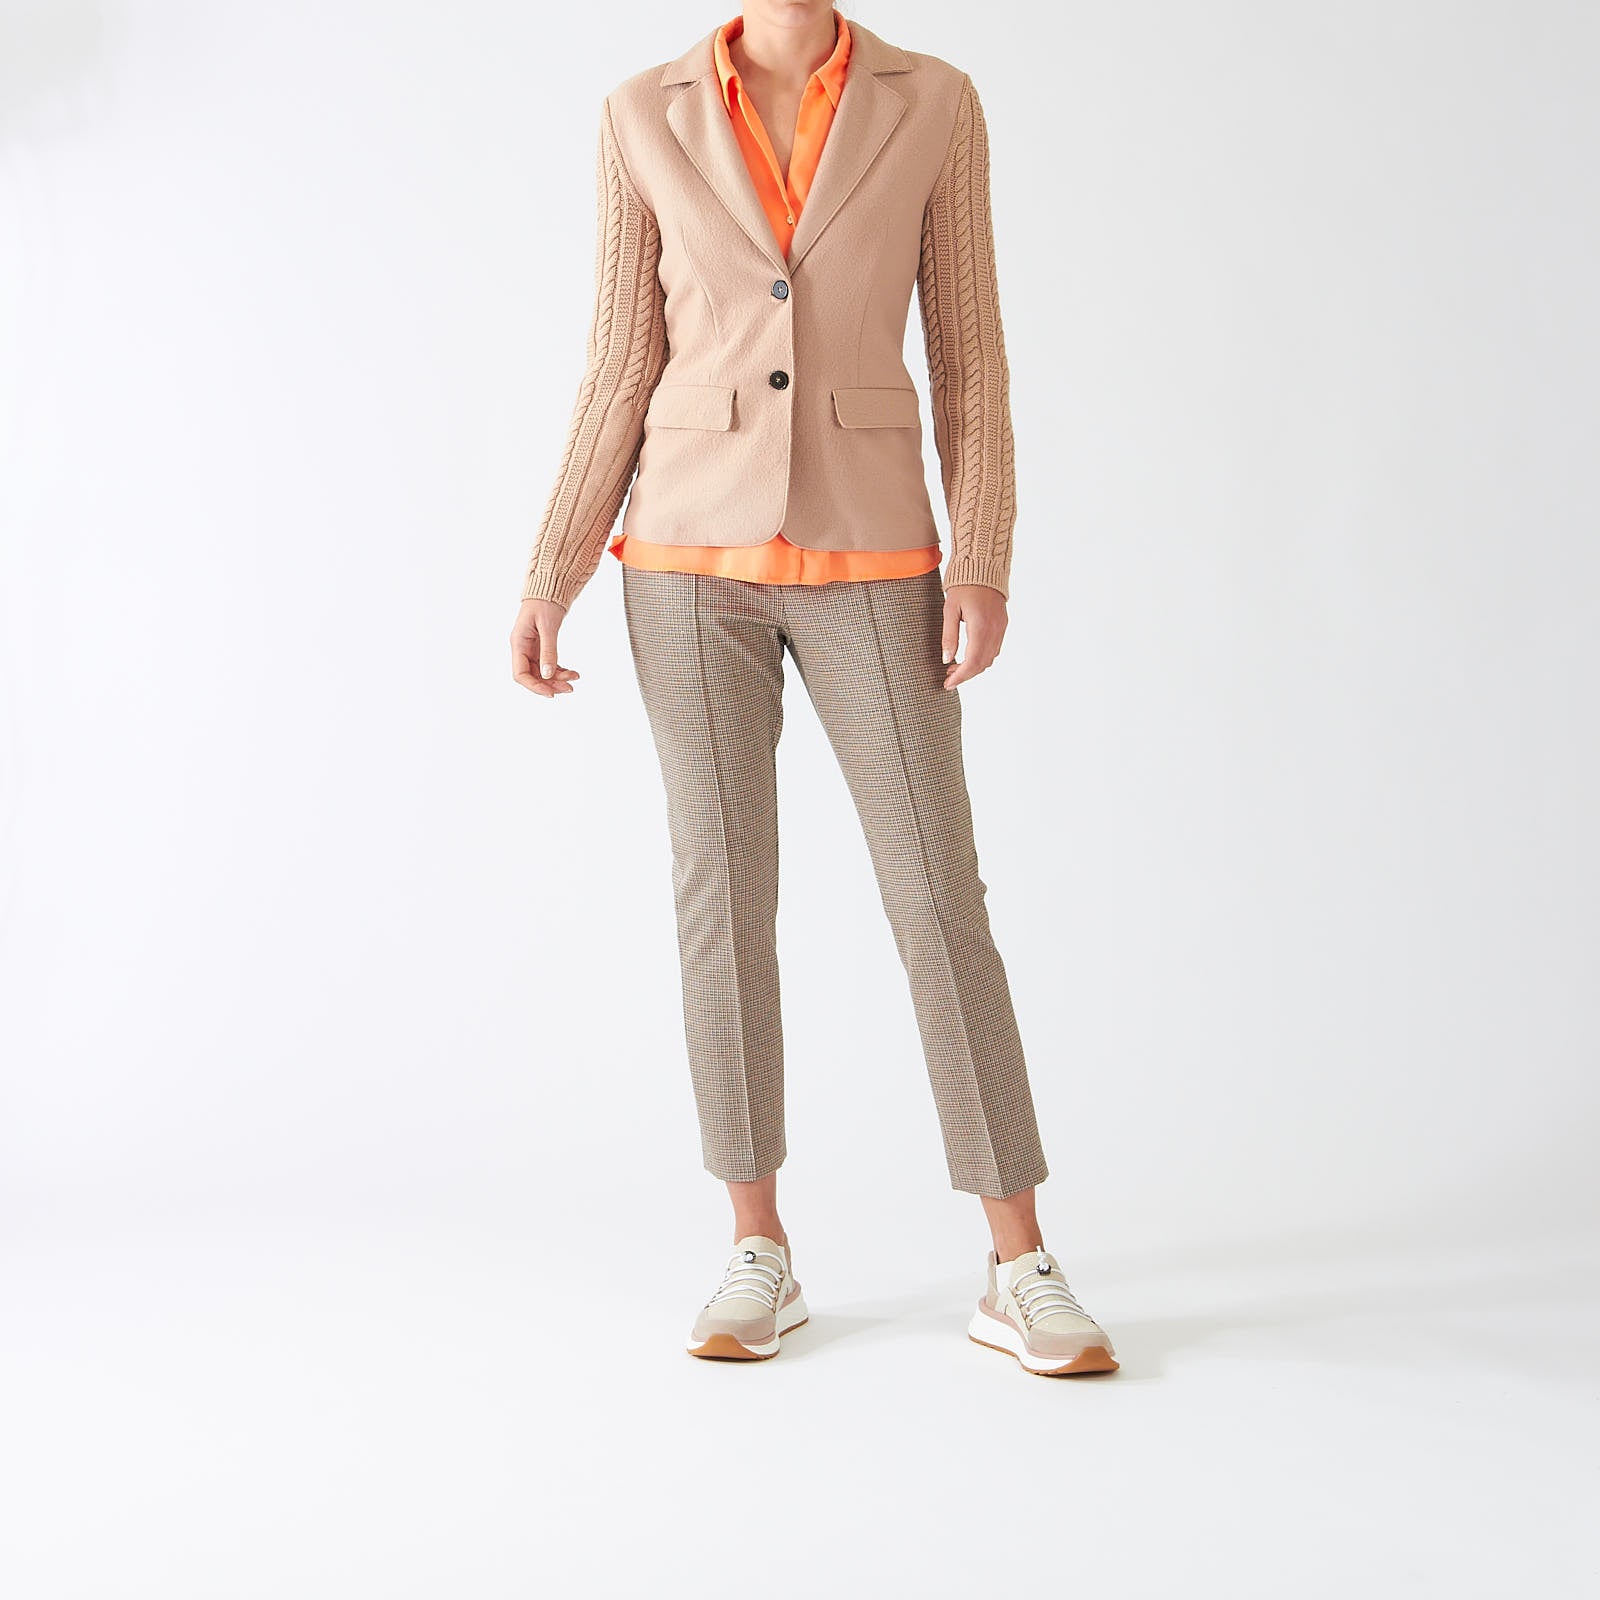 Bright Toffee Cable Wool Jacket